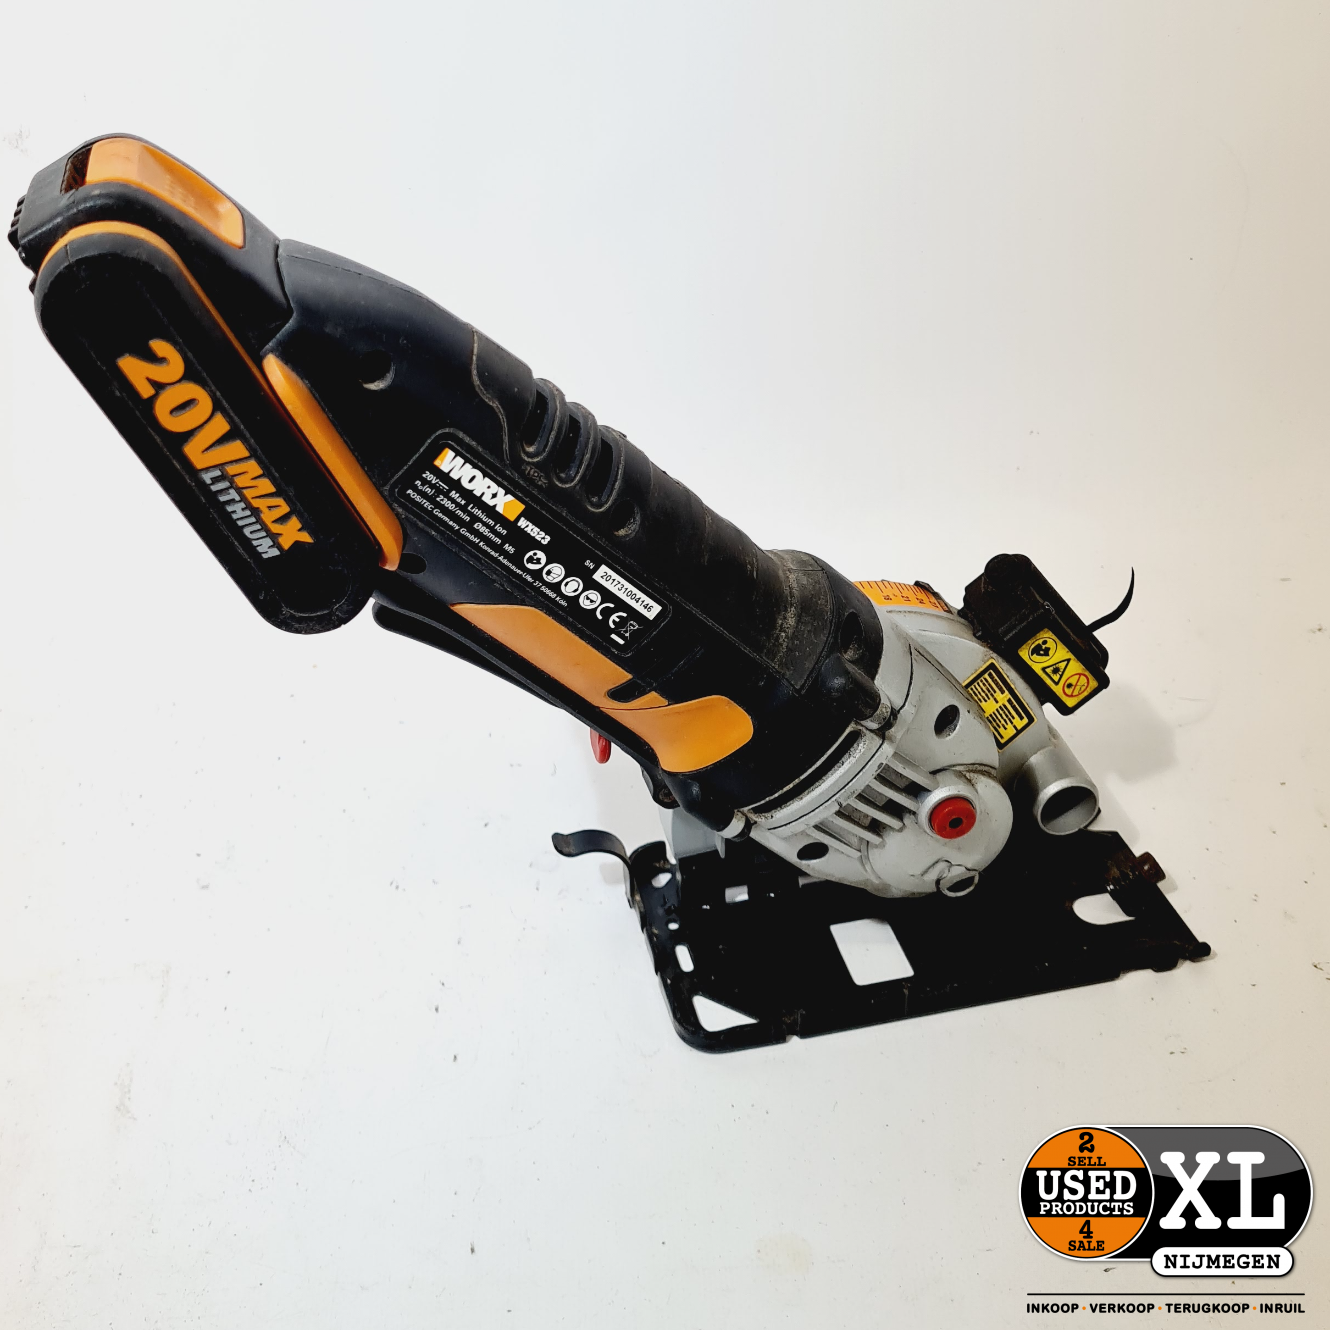 Worx WX523 met 20V Accu | Nette Staat - Used Products XL